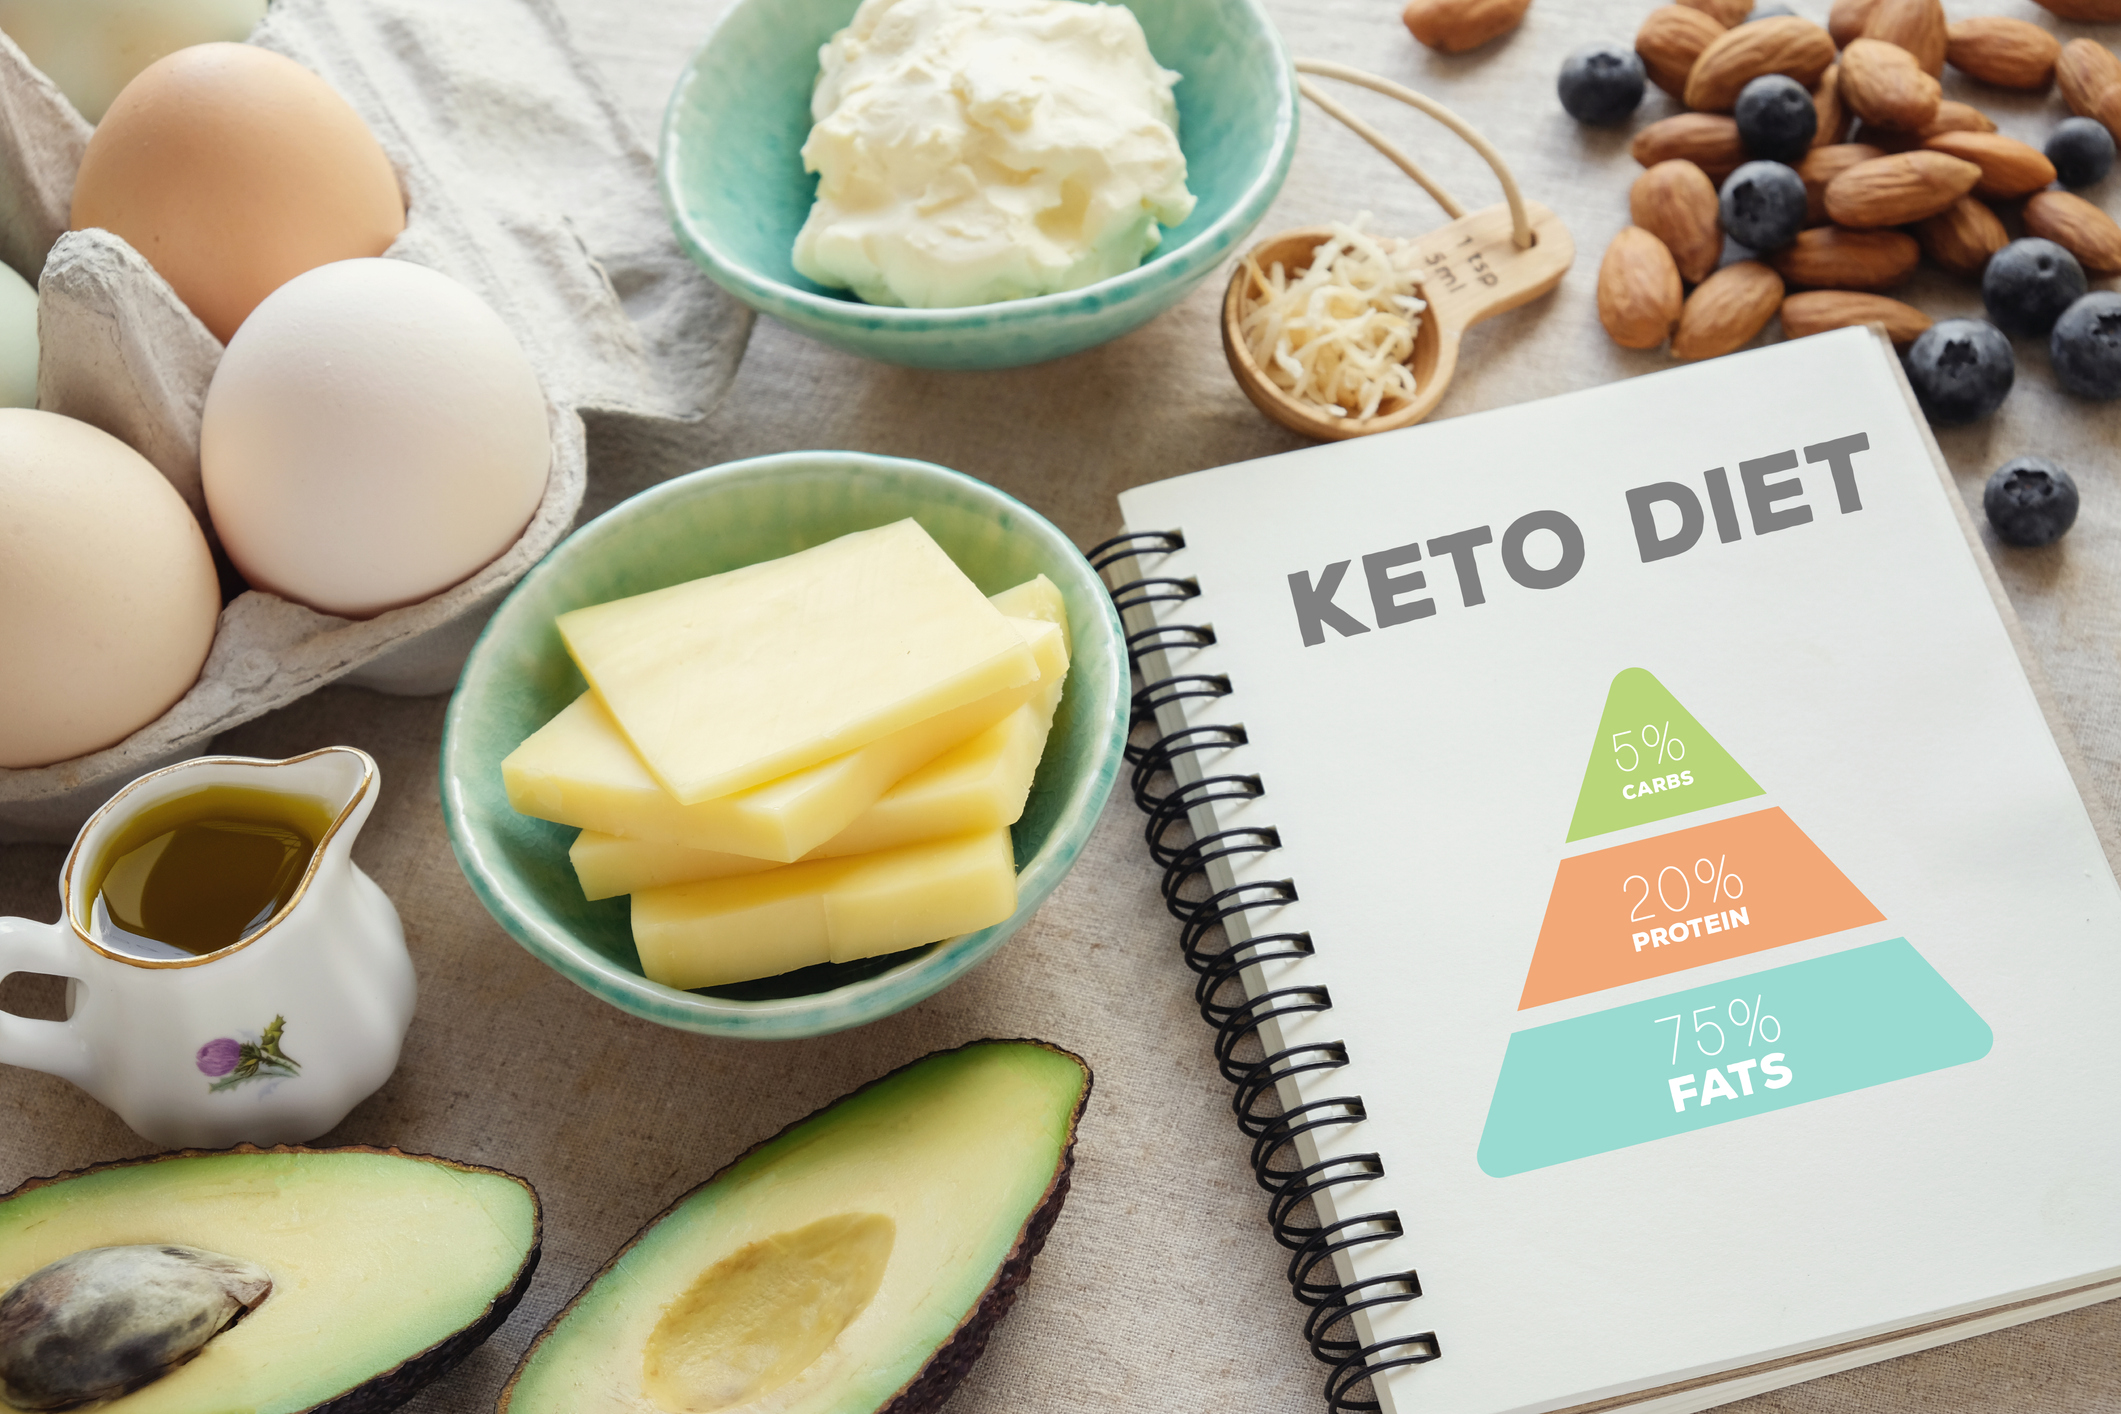 Can diet reverse heart failure? Keto might